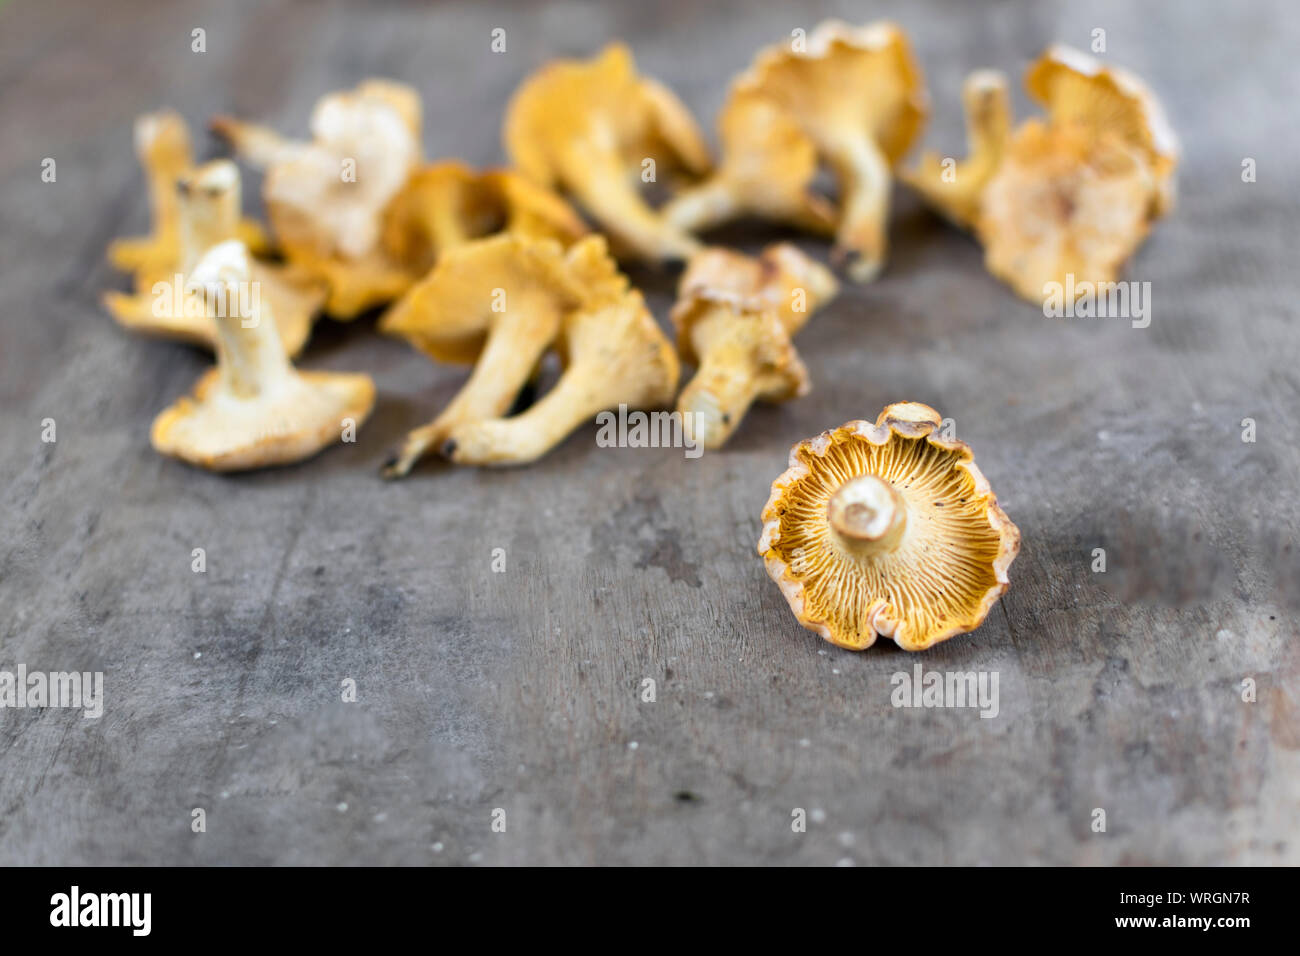 yellow chanterelle (cantharellus cibarius) on a rustic wooden background. Stock Photo